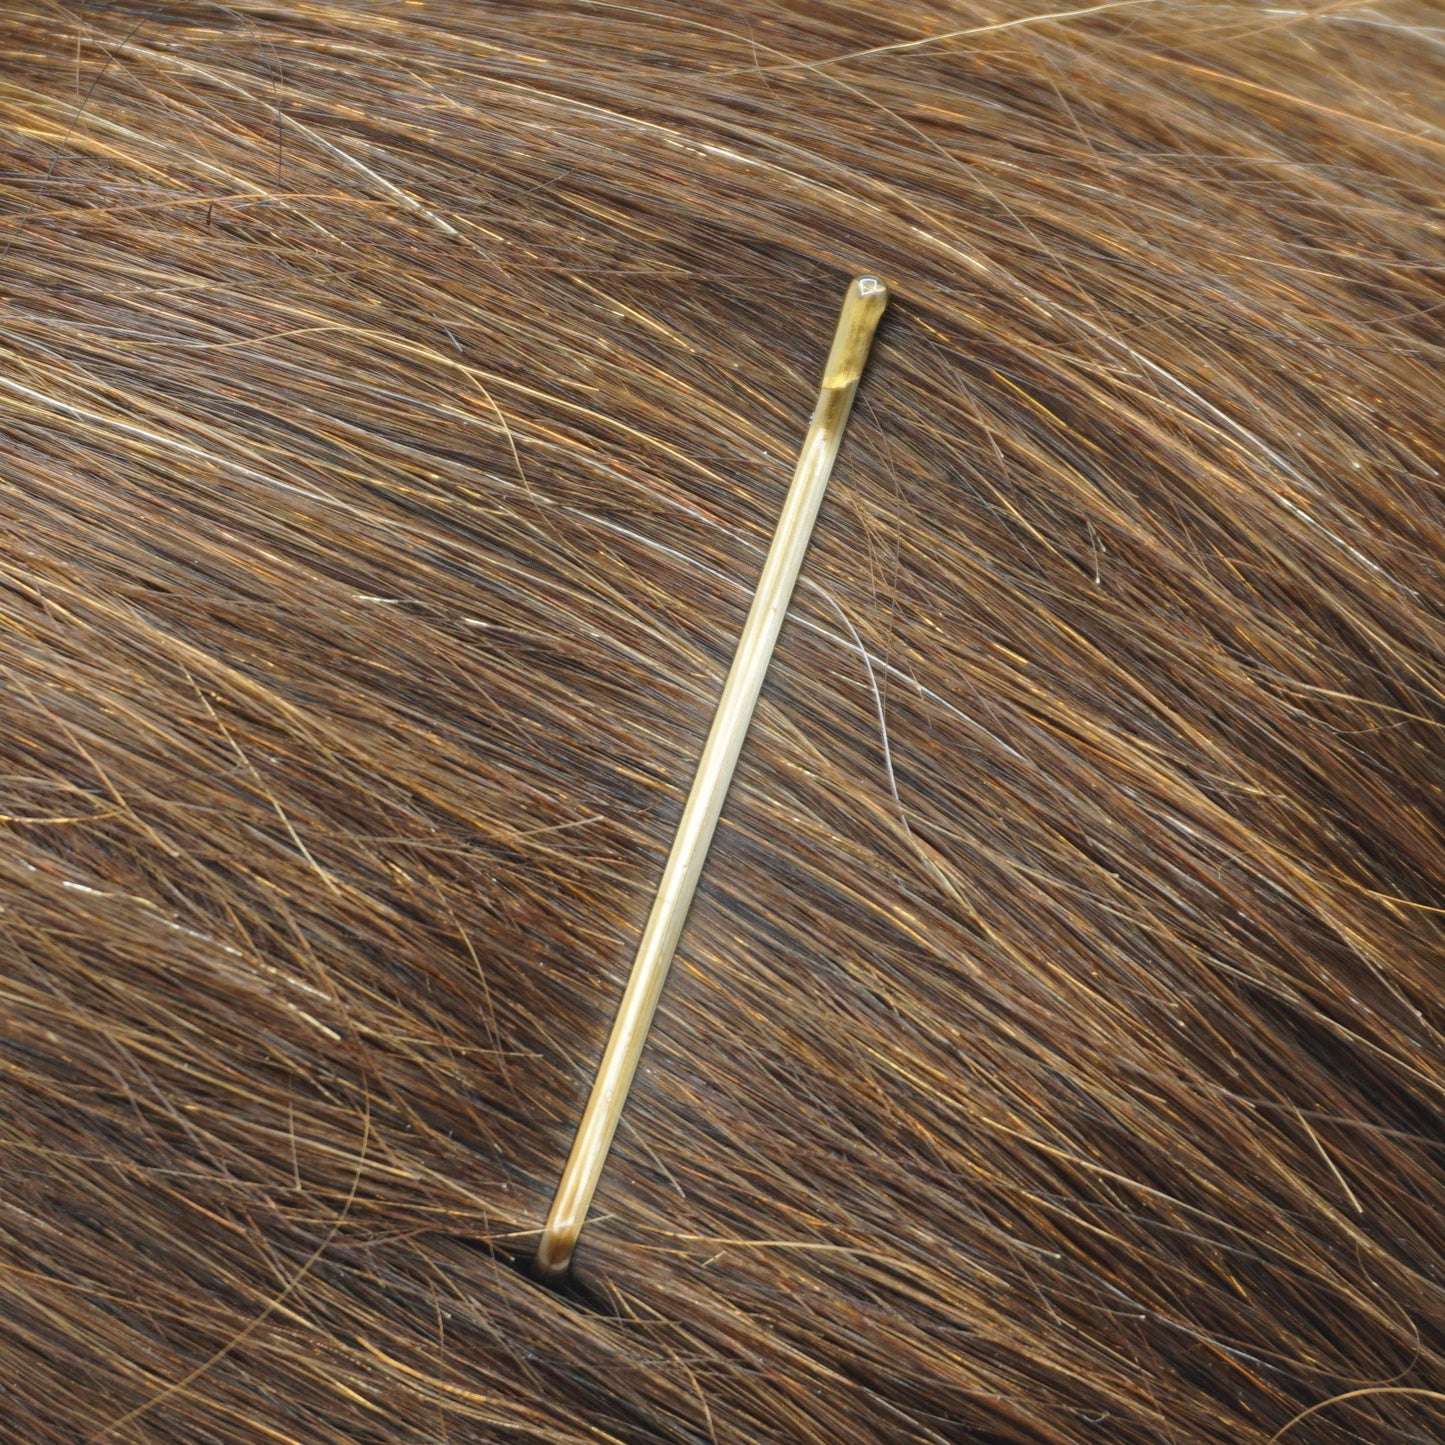 300, Brass Color, 2.0in (5.0cm), Italian Made Flat Bobby Pins, Recloseable Stay Clean and Organized Container